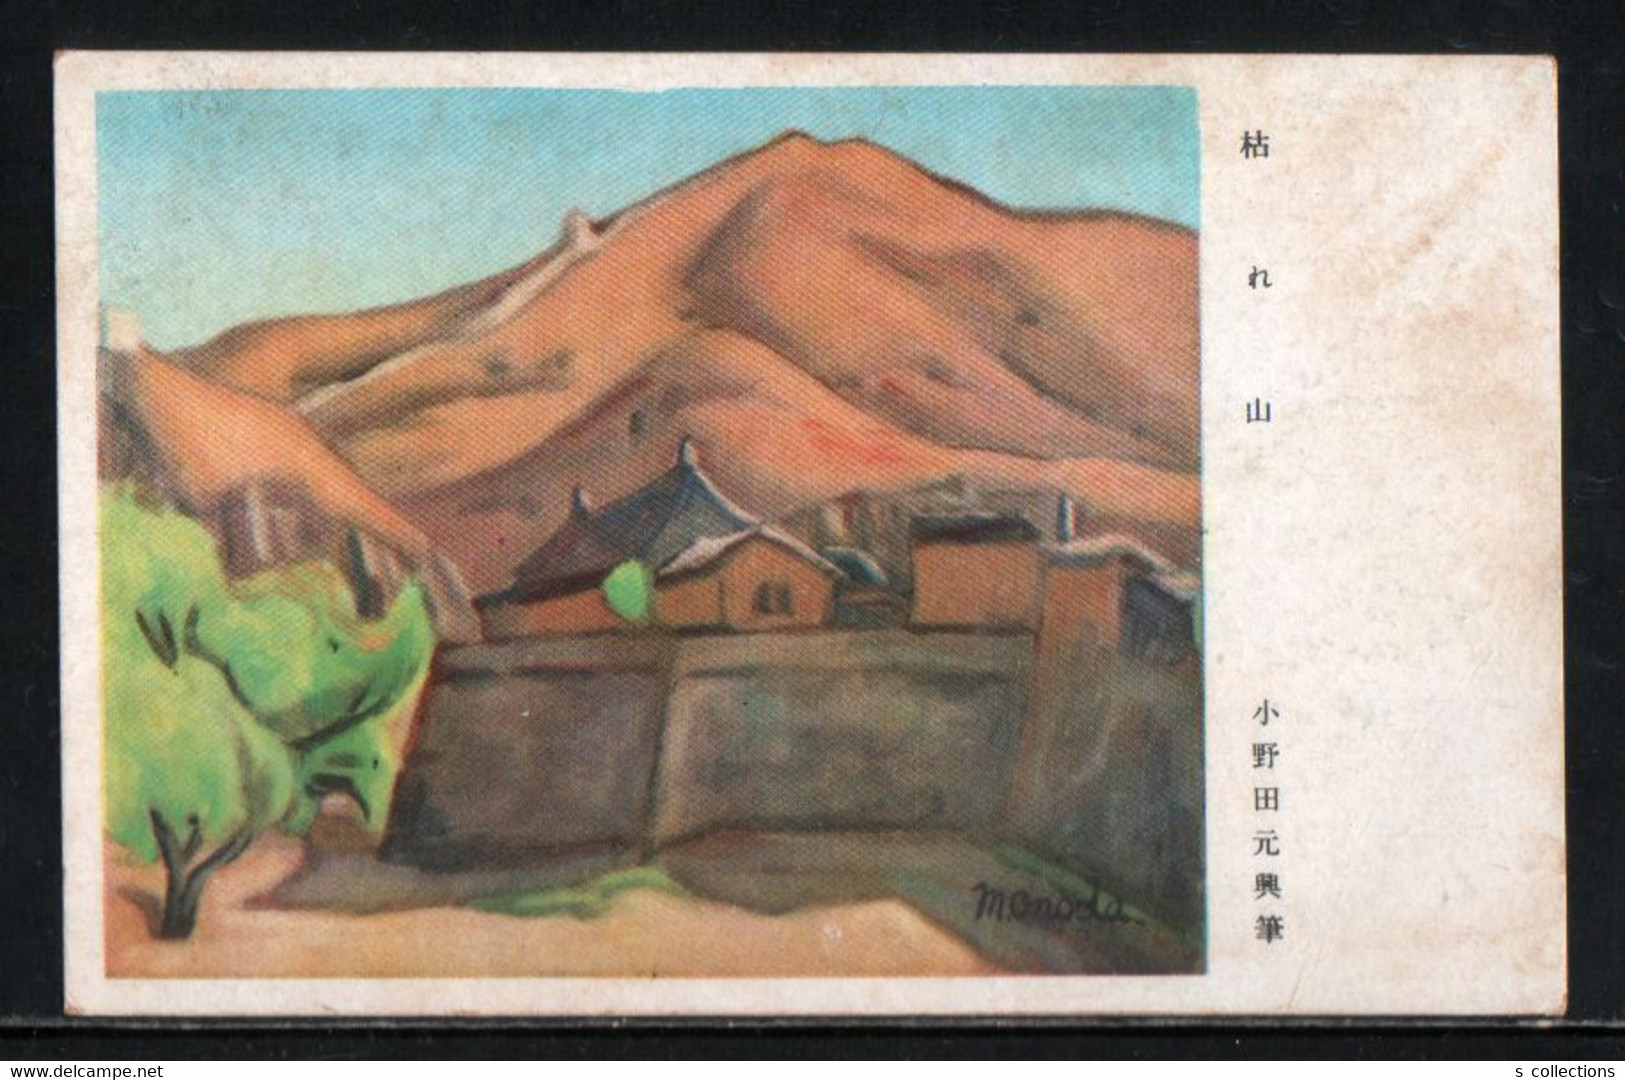 JAPAN WWII Military Picture Postcard North China Mongolia Garrison Army WW2 MANCHURIA CHINE MANDCHOUKOUO JAPON GIAPPONE - 1941-45 Northern China